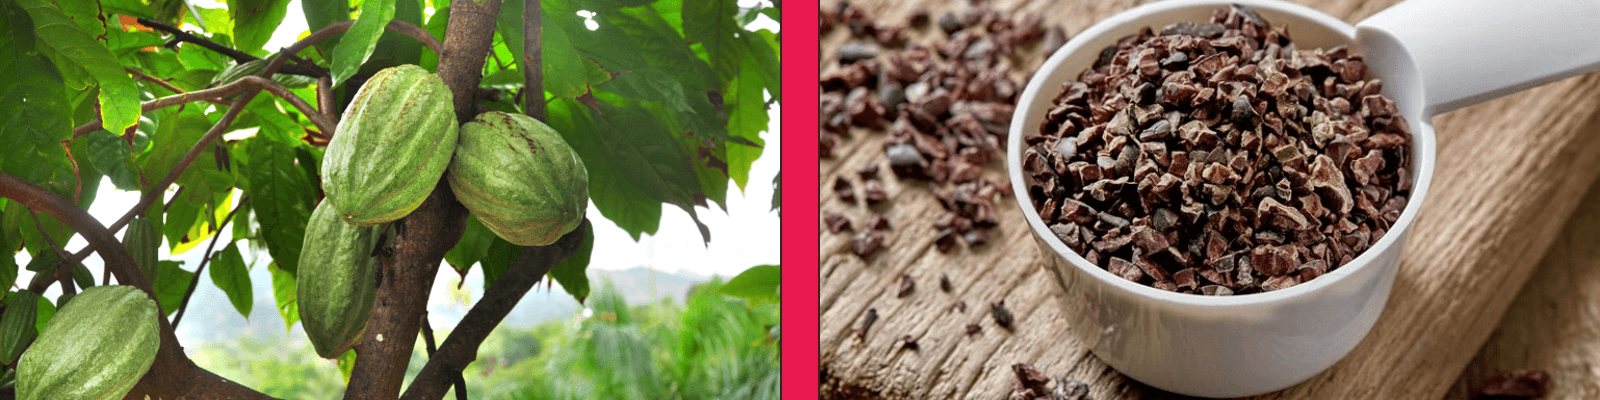 benefits of cacao powder and cocoa nibs